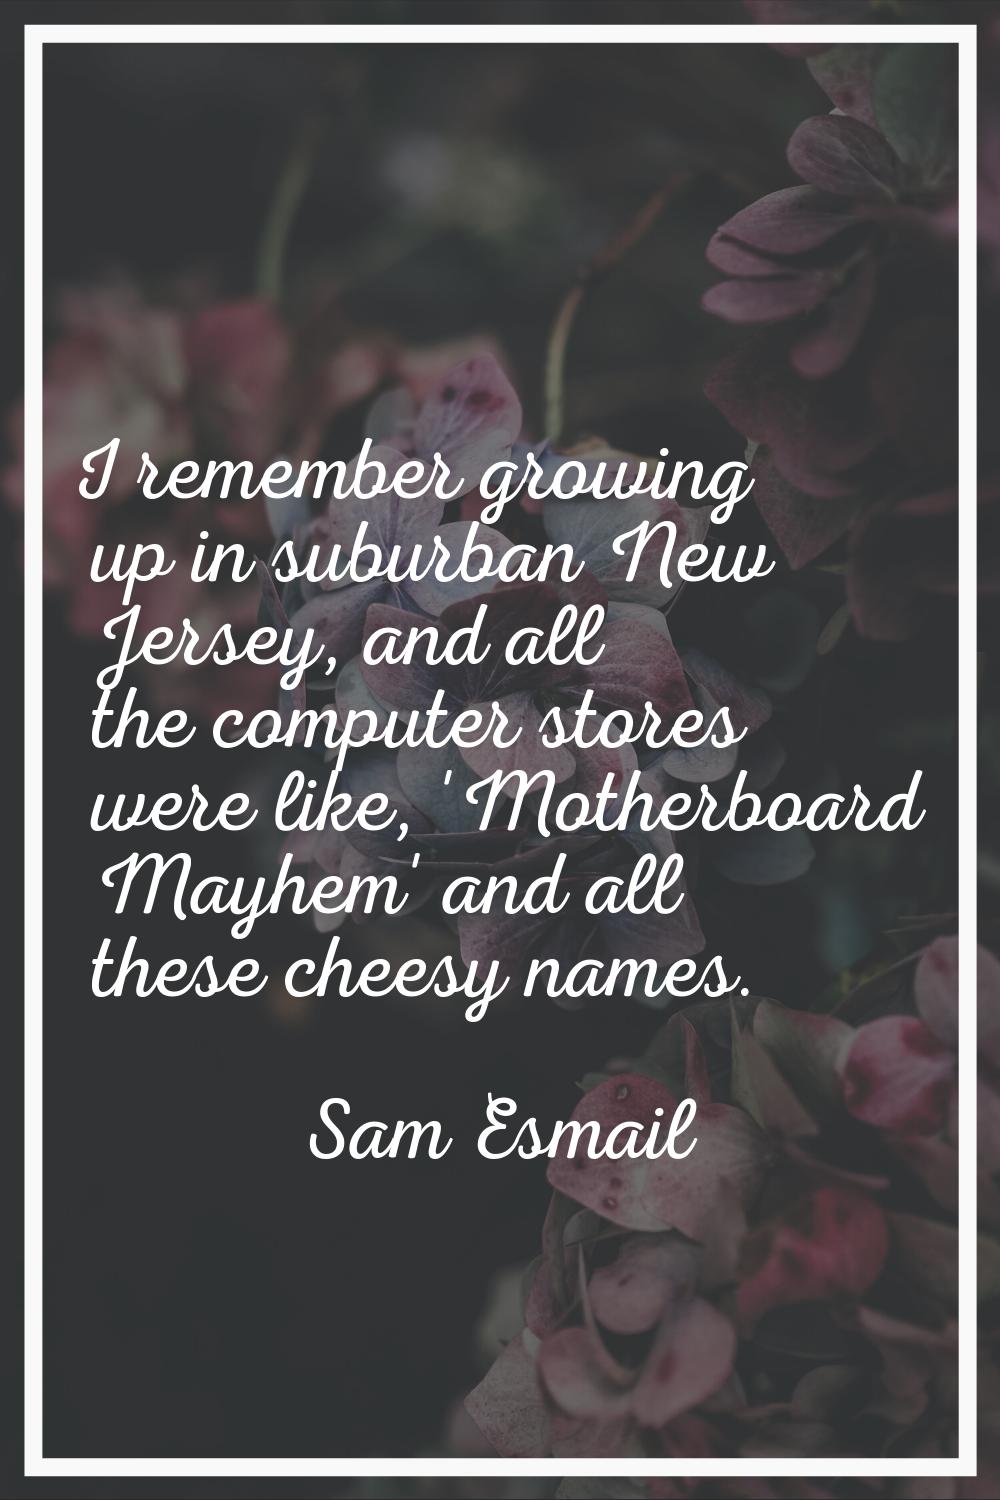 I remember growing up in suburban New Jersey, and all the computer stores were like, 'Motherboard M